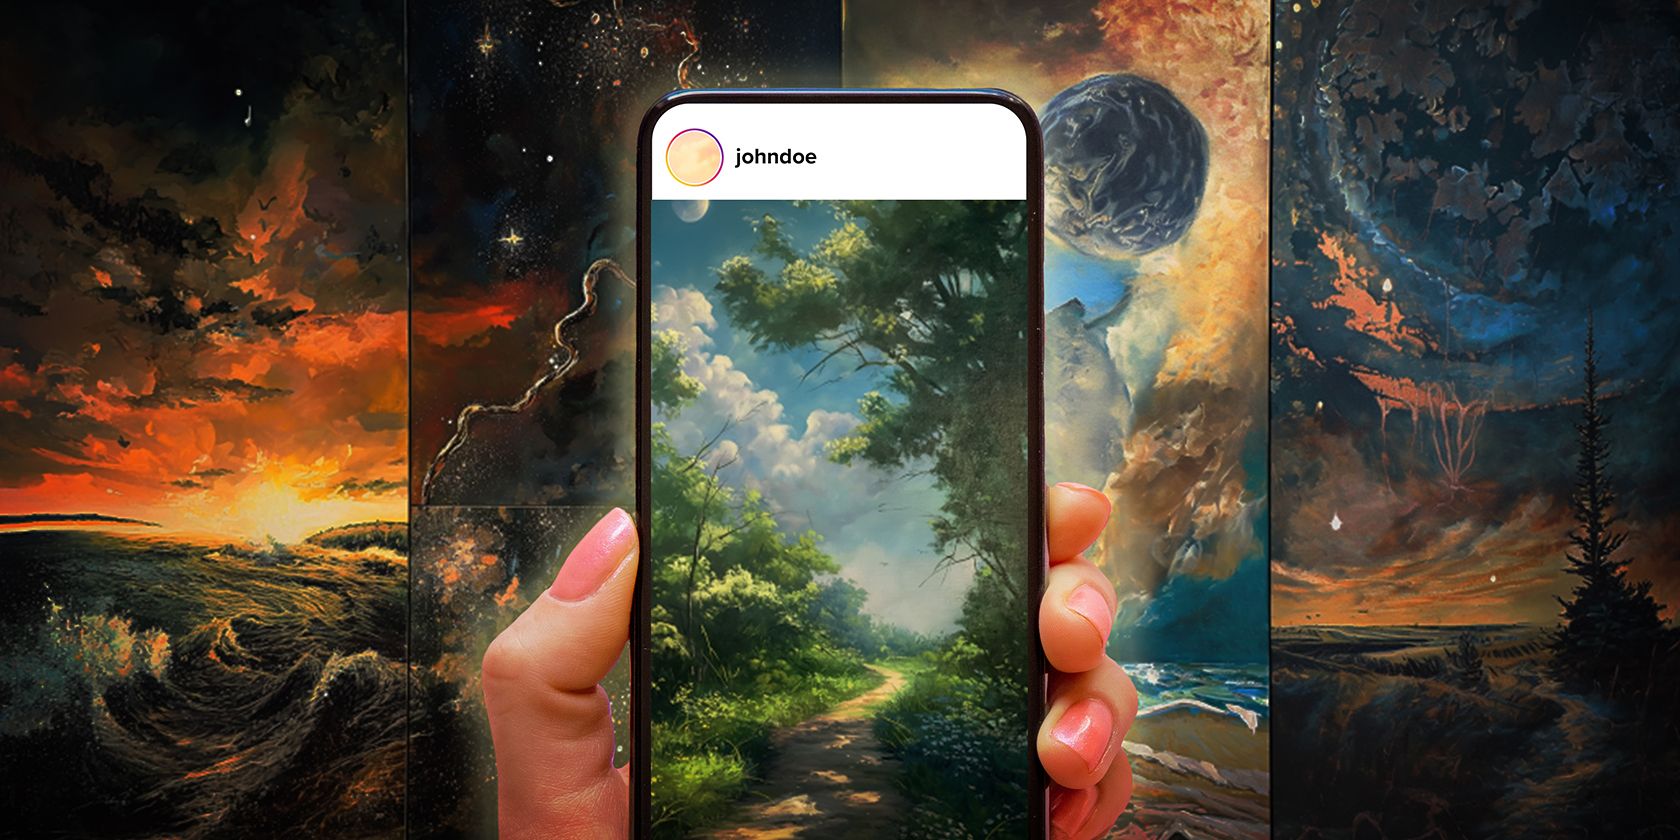  A hand holding a smartphone which displays a serene nature scene, blending seamlessly with the dramatic, artistic landscape background.